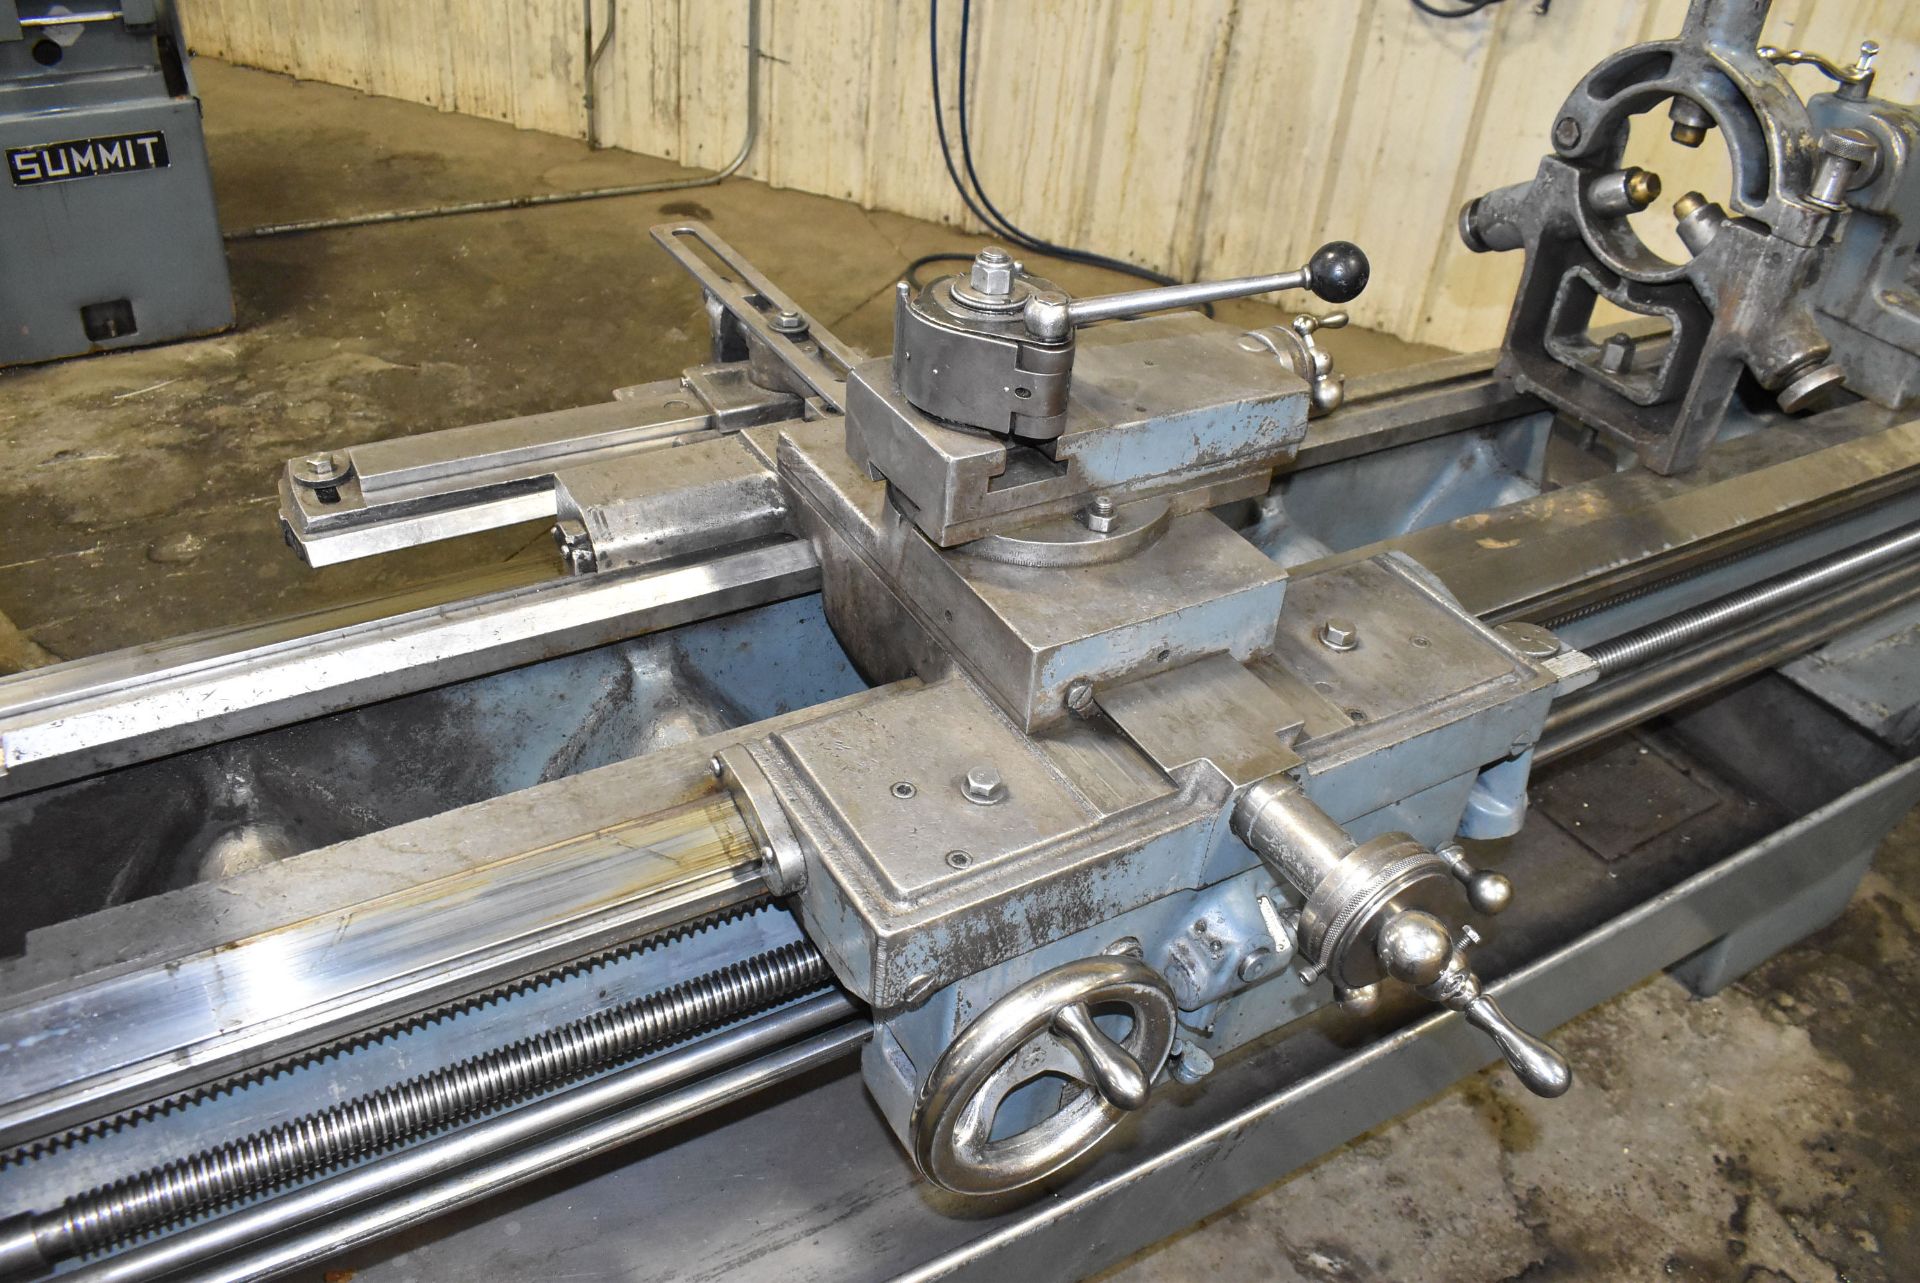 WILLIAM & WILSON LEBLOND REGAL LATHE WITH 22" SWING OVER BED, 67.5" BETWEEN CENTERS, 1.25" BORE, - Image 8 of 10